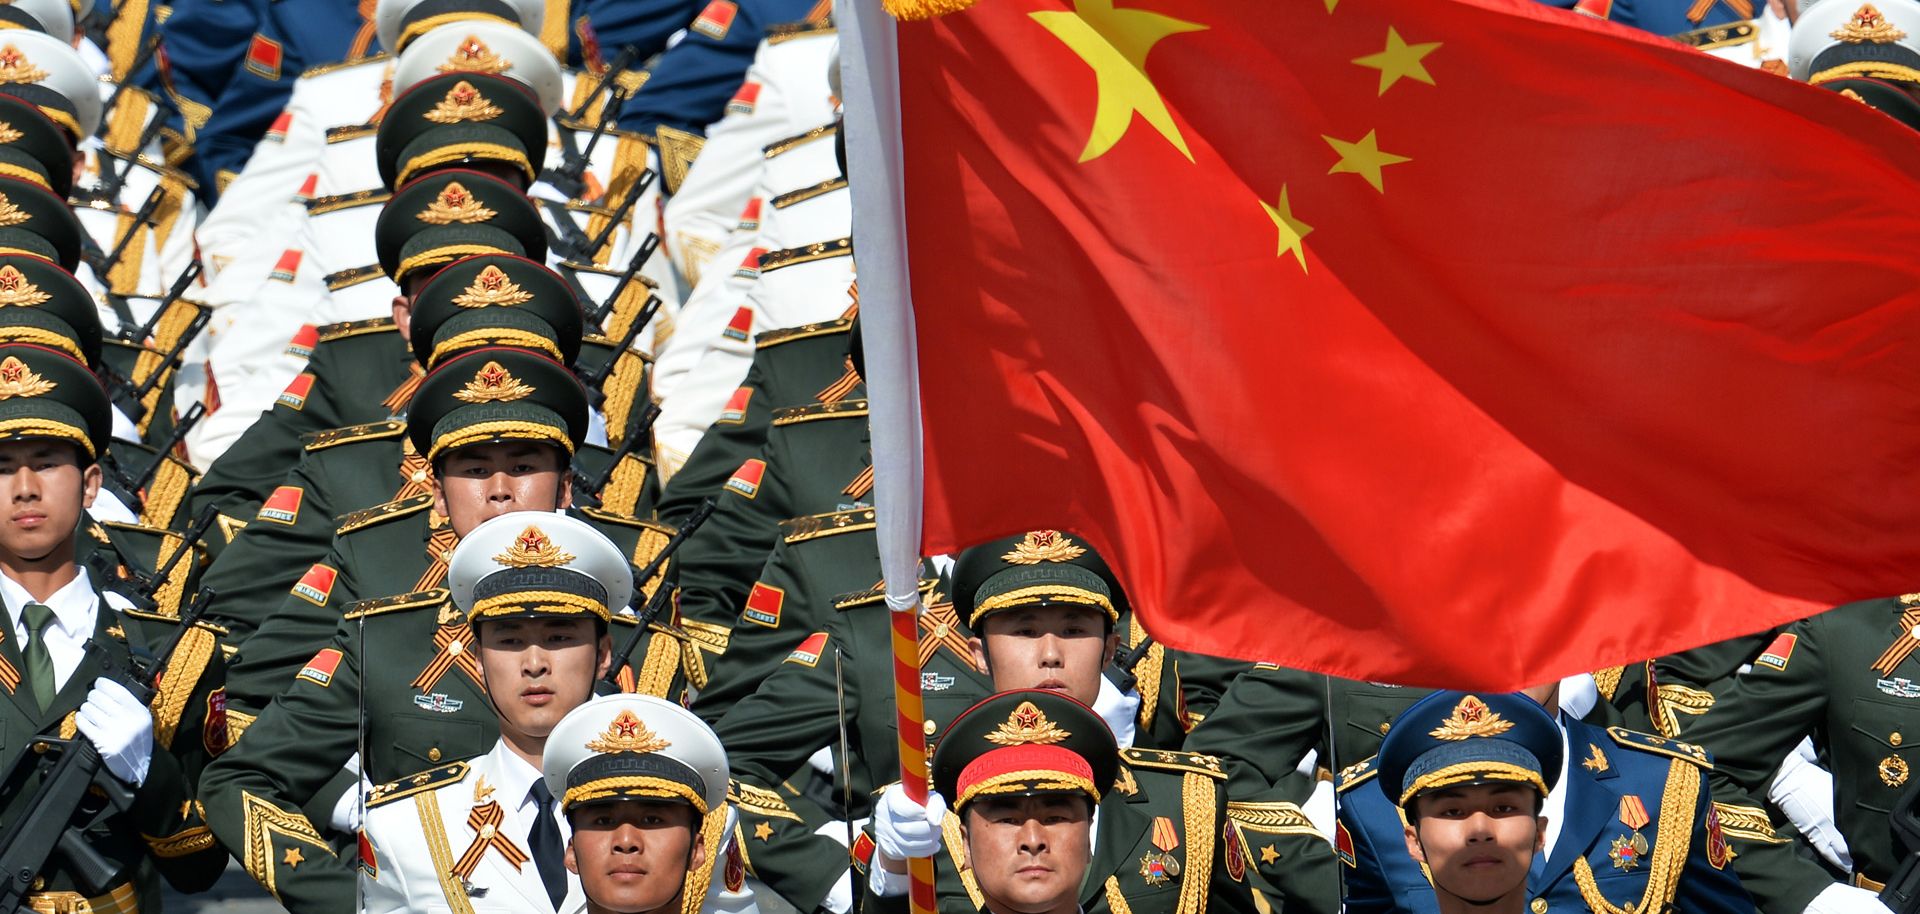 China has enacted major parts of its planned military reform, but more arduous tasks remain.